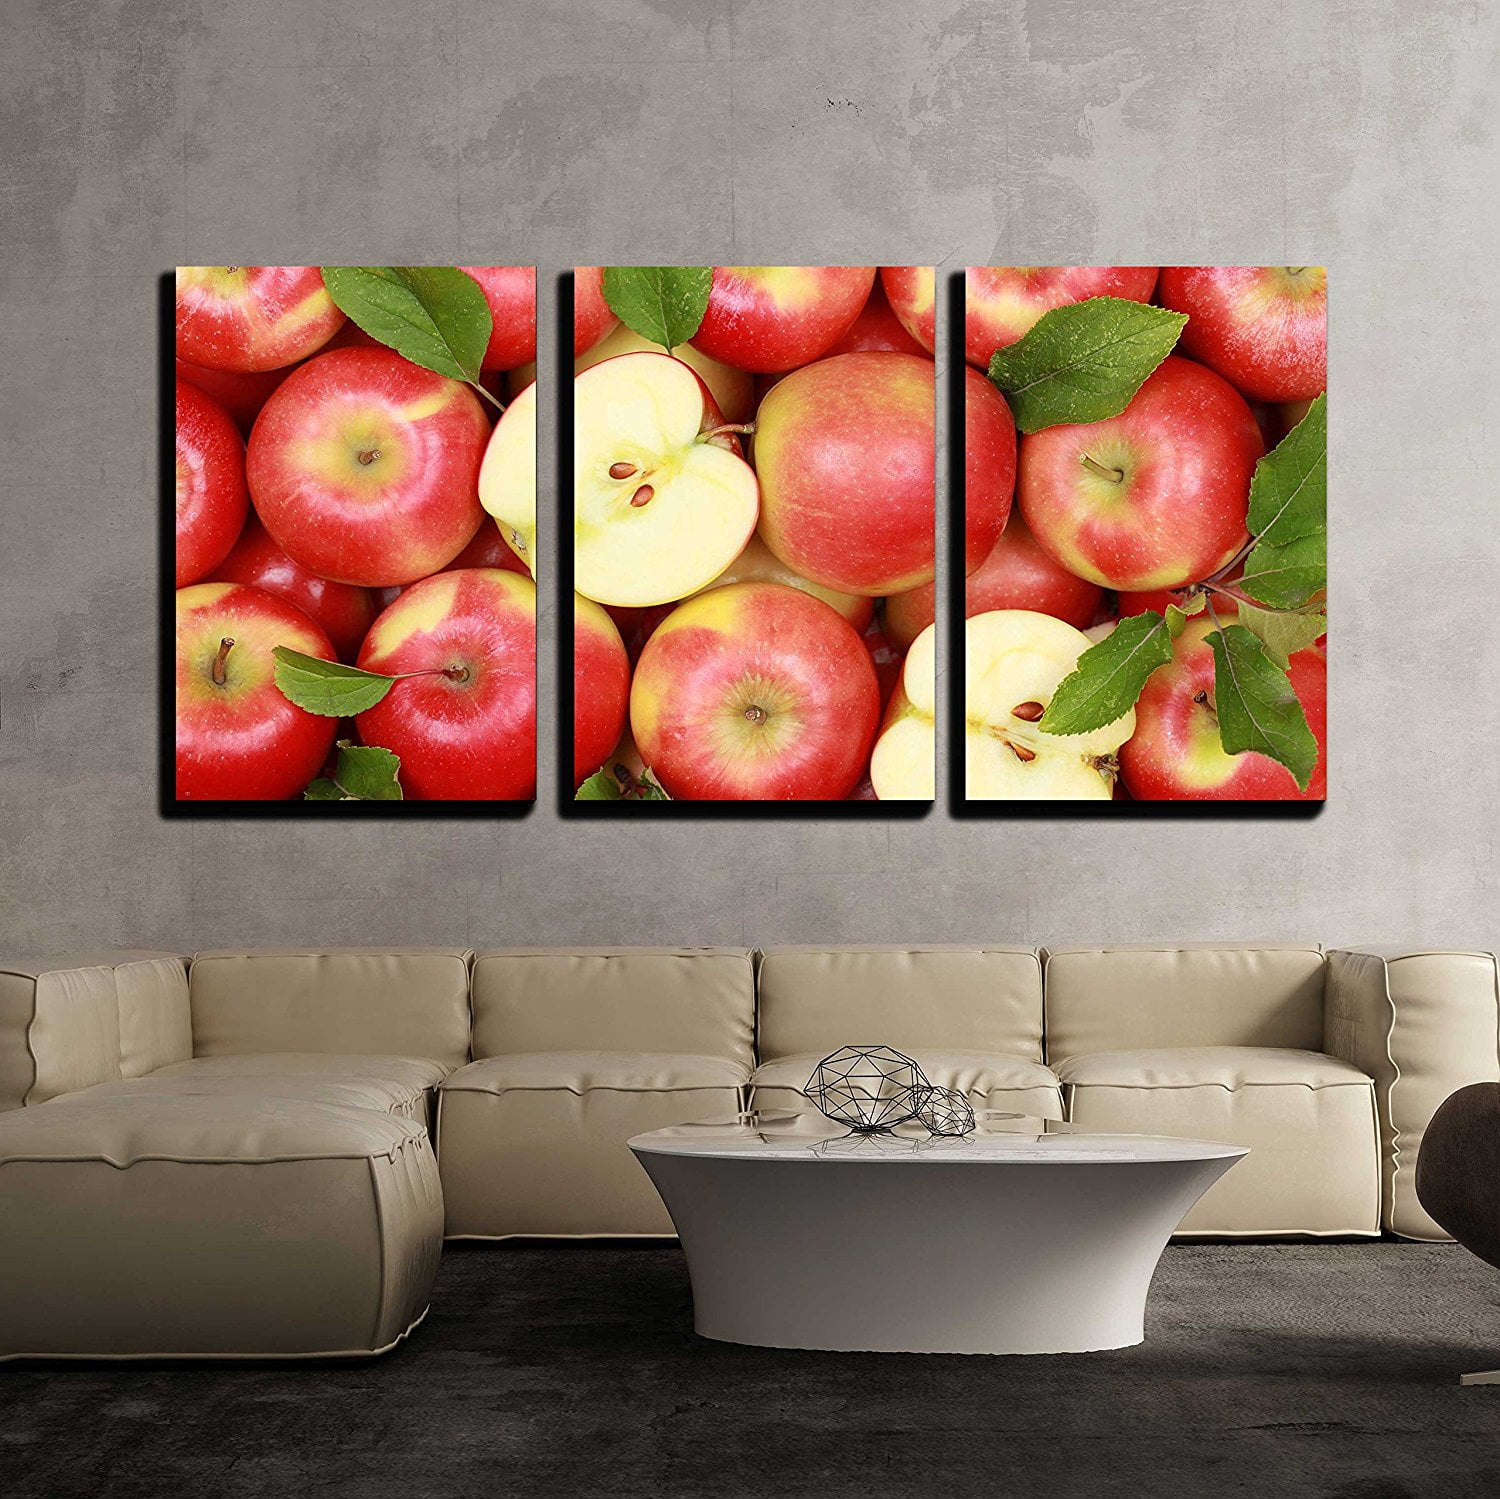 wall26-3 Piece Canvas Wall Art - Group of Red Apples with Their Leaves -  Modern Home Decor Stretched and Framed Ready to Hang - 16